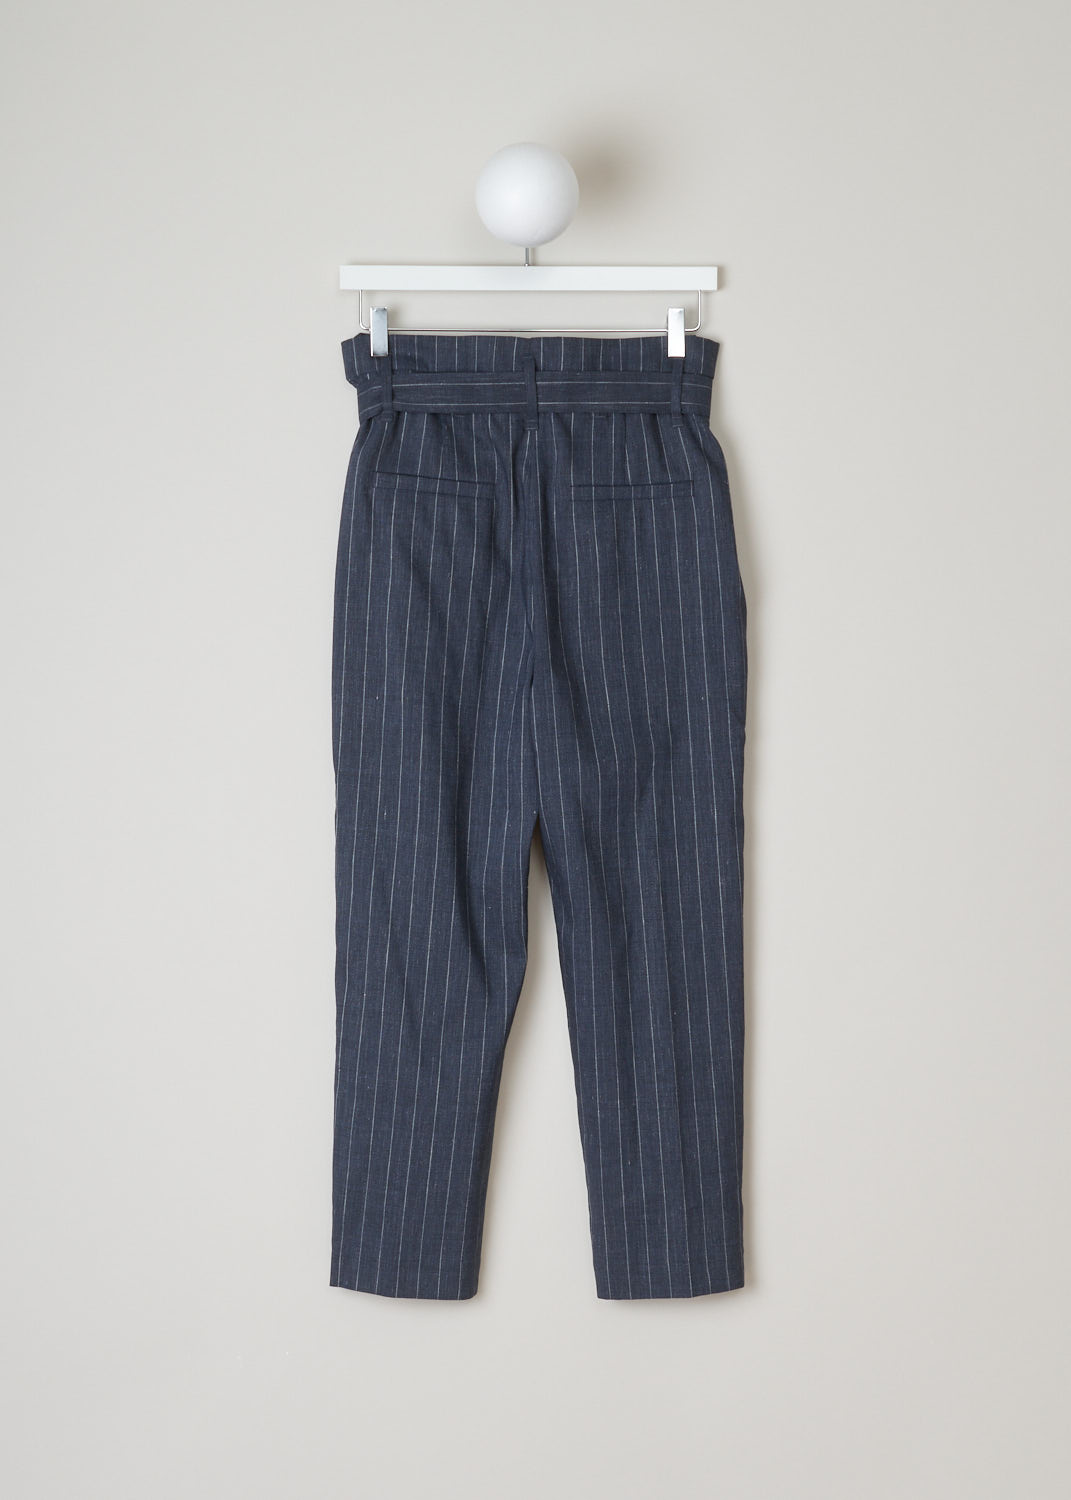 Burnello cucineli, high-waist pinstripe pants, MF554P6588_C003, blue grey, back, Shaped for a high-waist fit. This paper-bag waist pants is designed with straight cropped legs and soft pleats that fall from the waistband. Comes with matching D-ring belt, slanted side pockets and welt pockets on the back. Fastening option on this model is the D-ring belt plus two metal clips and a backing buttons above the zipper.